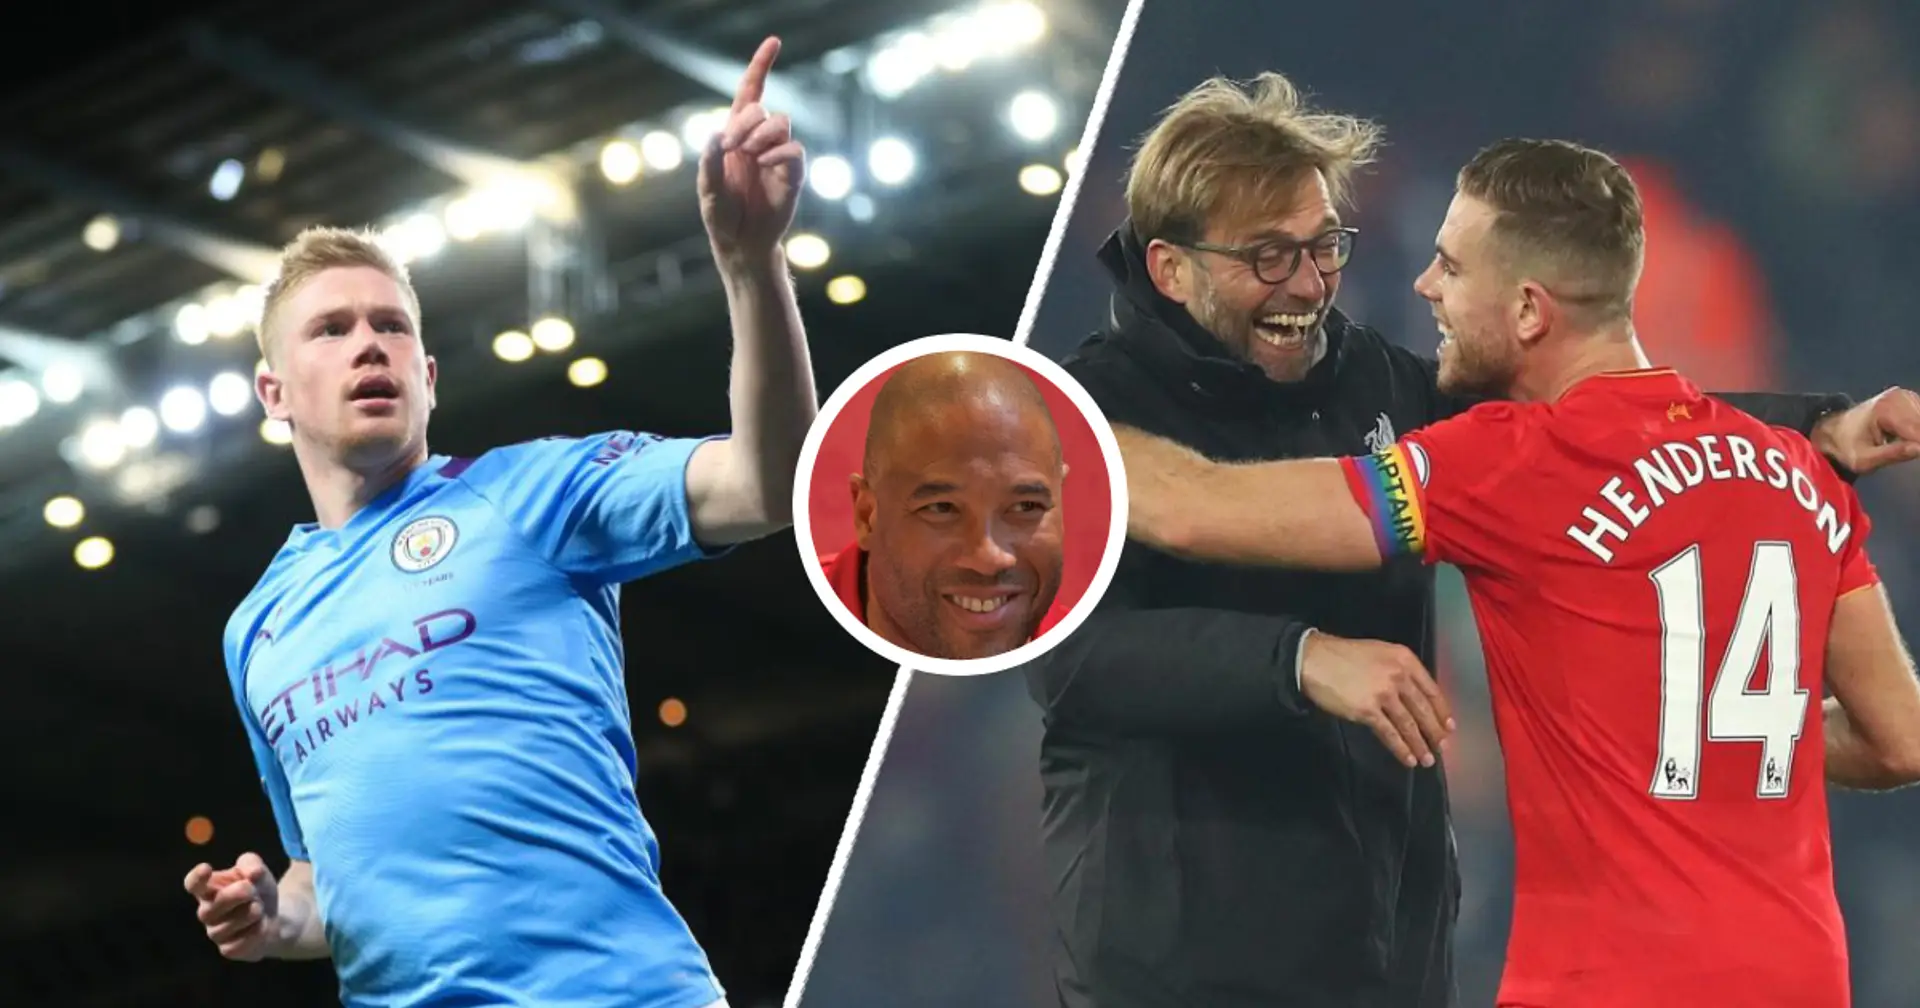 '99% of people would pick De Bruyne over Hendo or Gini, but they work for Liverpool': John Barnes salutes Klopp's  supreme system which makes team tick